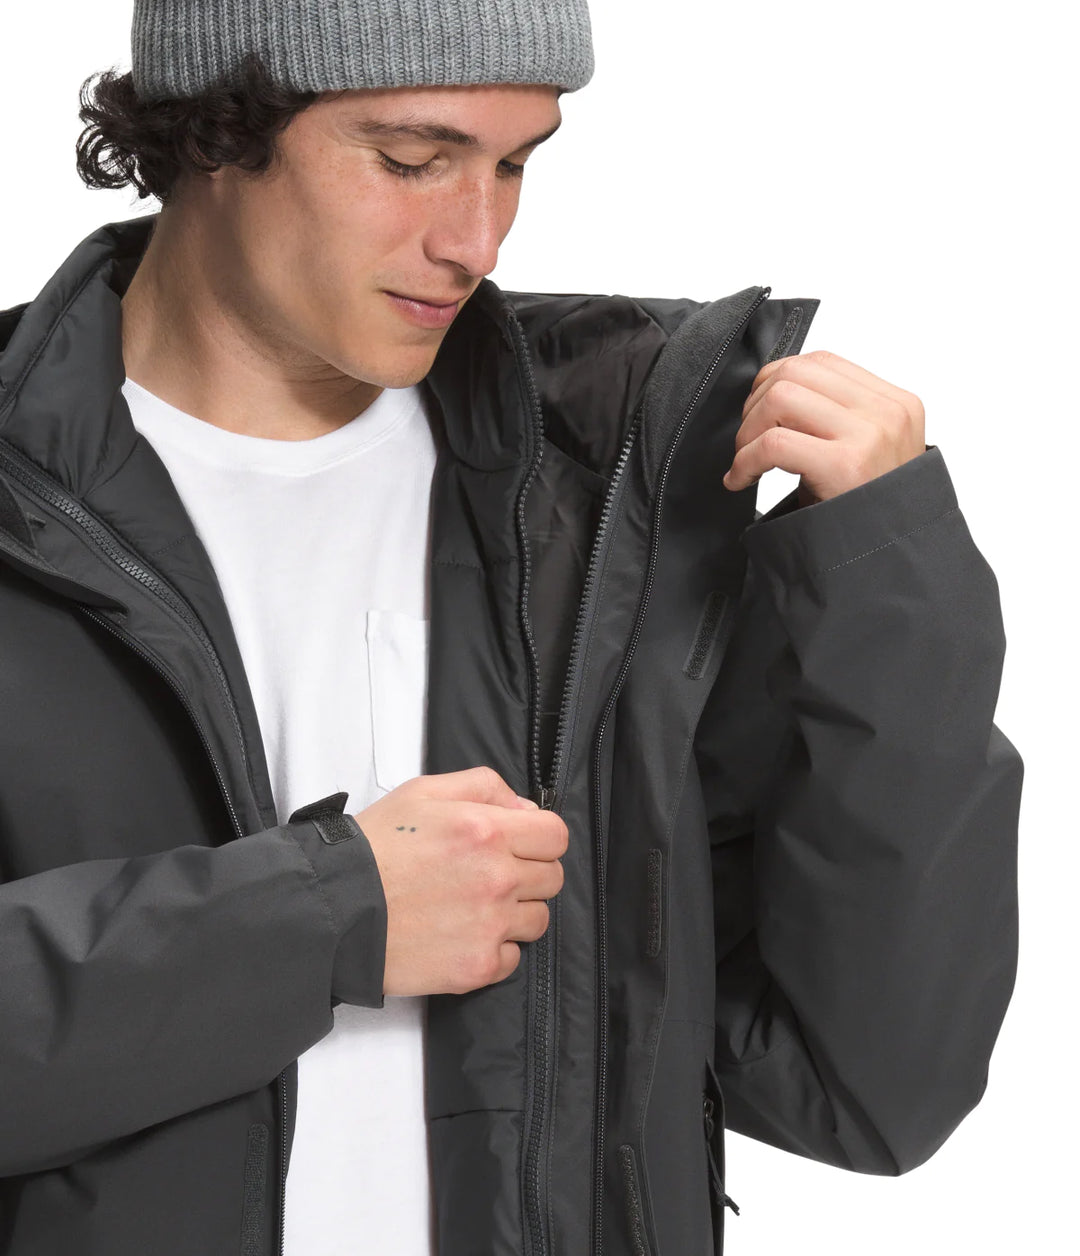 North Face Men’s Carto Triclimate® Jacket